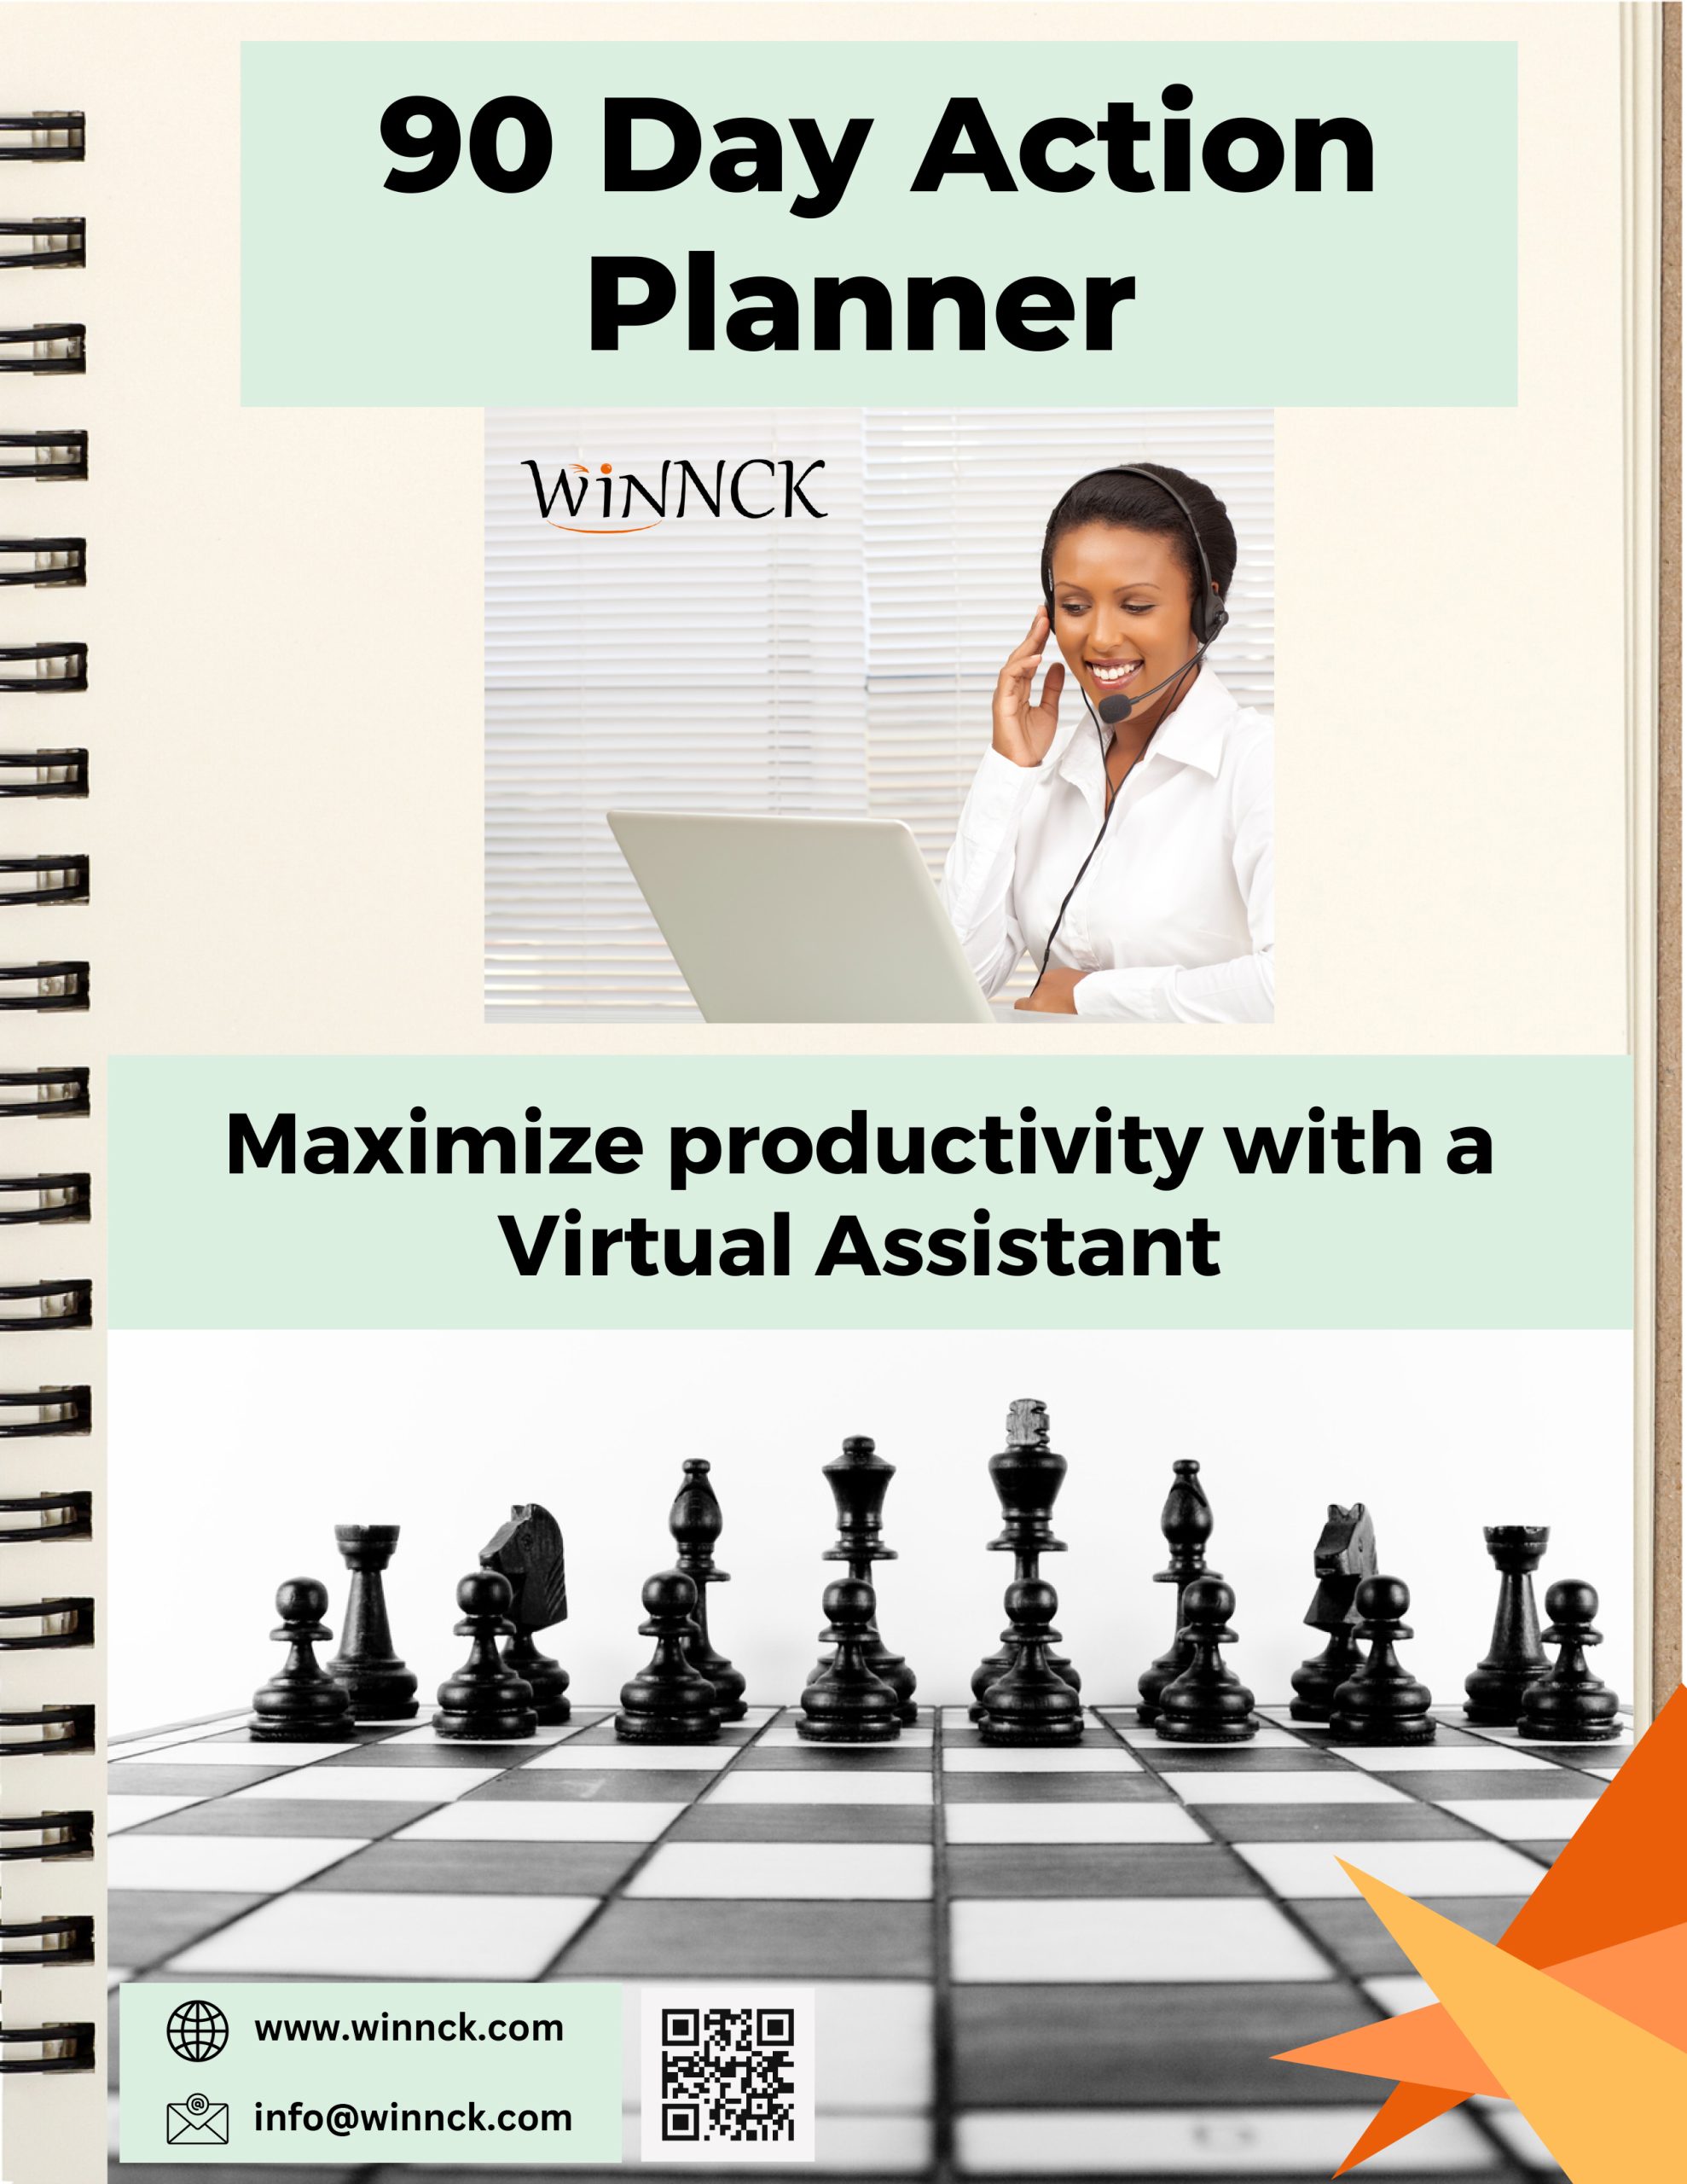 90 day action planner maximize productivity with a virtual assistant.